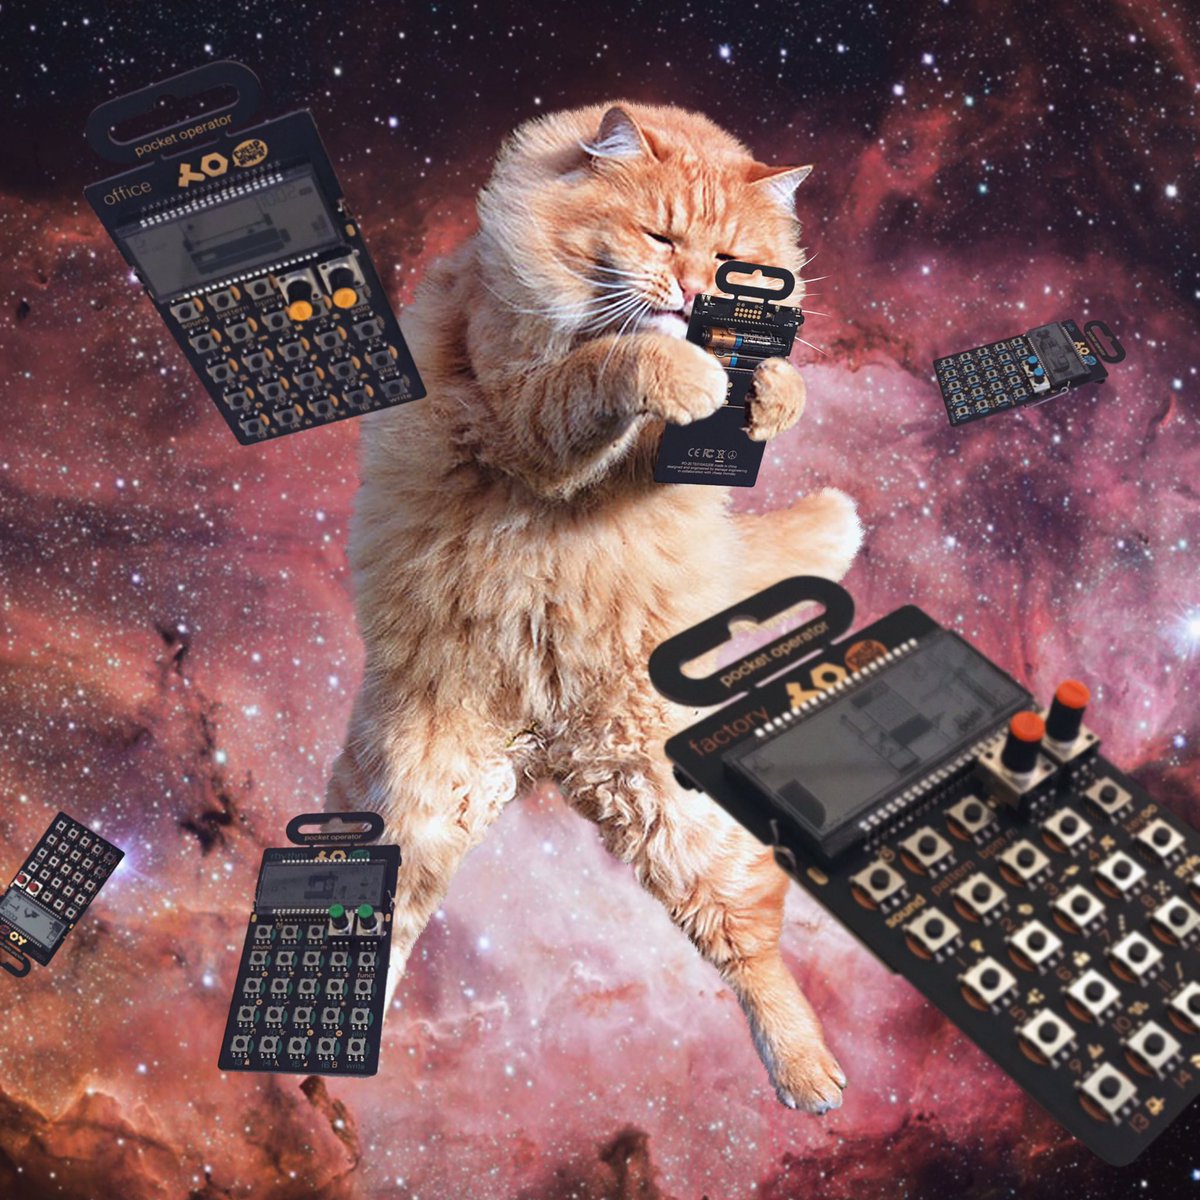 Cats Synths Space On Twitter I M The Opurrator With My Pocket Catculator Catsonsynthesizersinspace Teenageengineering Cats Synths Space Pocketoperator Https T Co C7jzj4mbdh